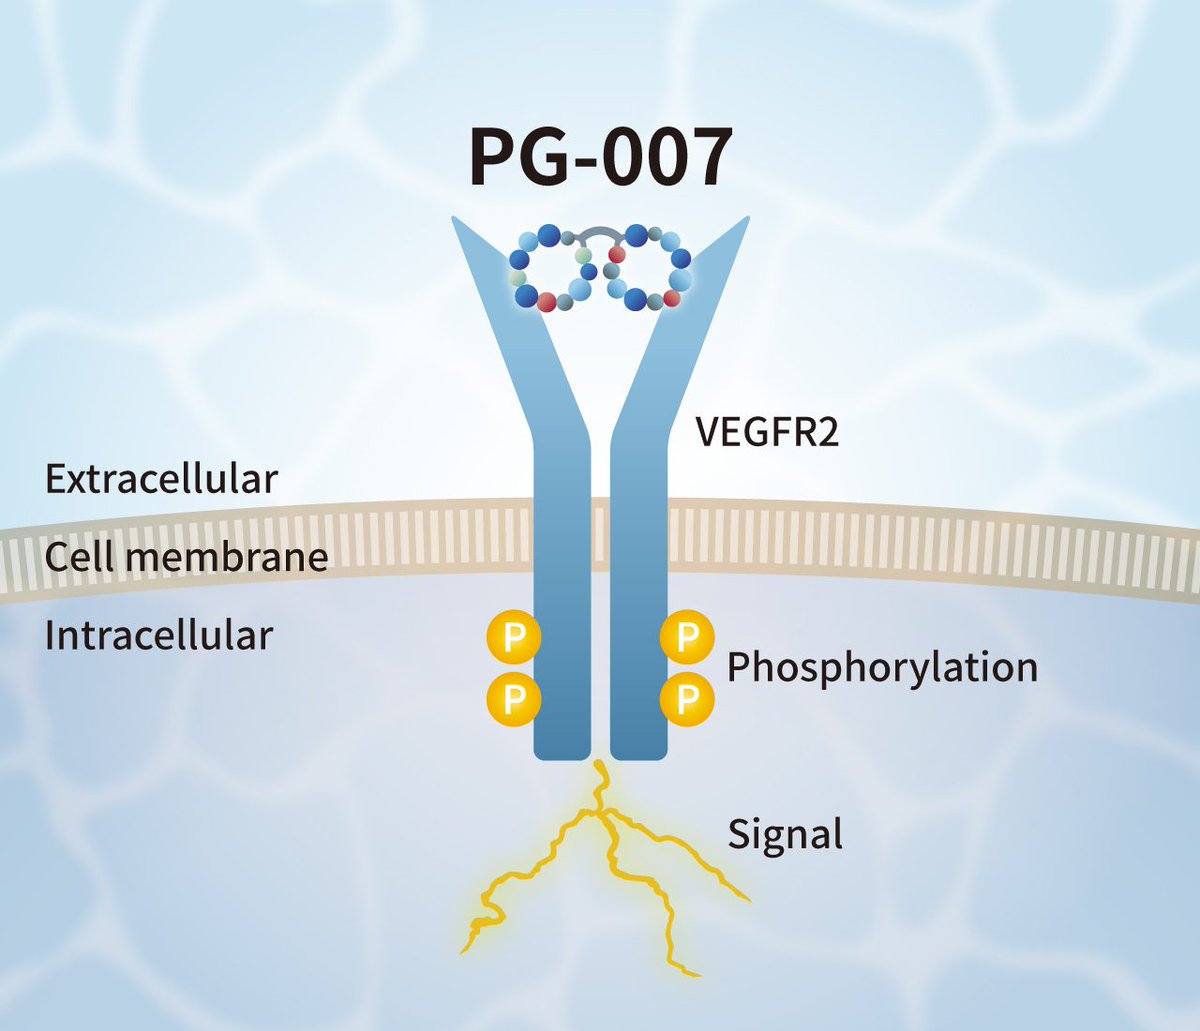 Peptigrowth chemically synthesized #peptide PG-007 possesses similar VEGFR2 #phosphorylation capability to growth factor VEGF & promote #proliferation of #iPSC-derived #endothelial cells w/out lot variability & animal associated impurity #vasculogenesis 🔗stratech.co.uk/our-partners/p…